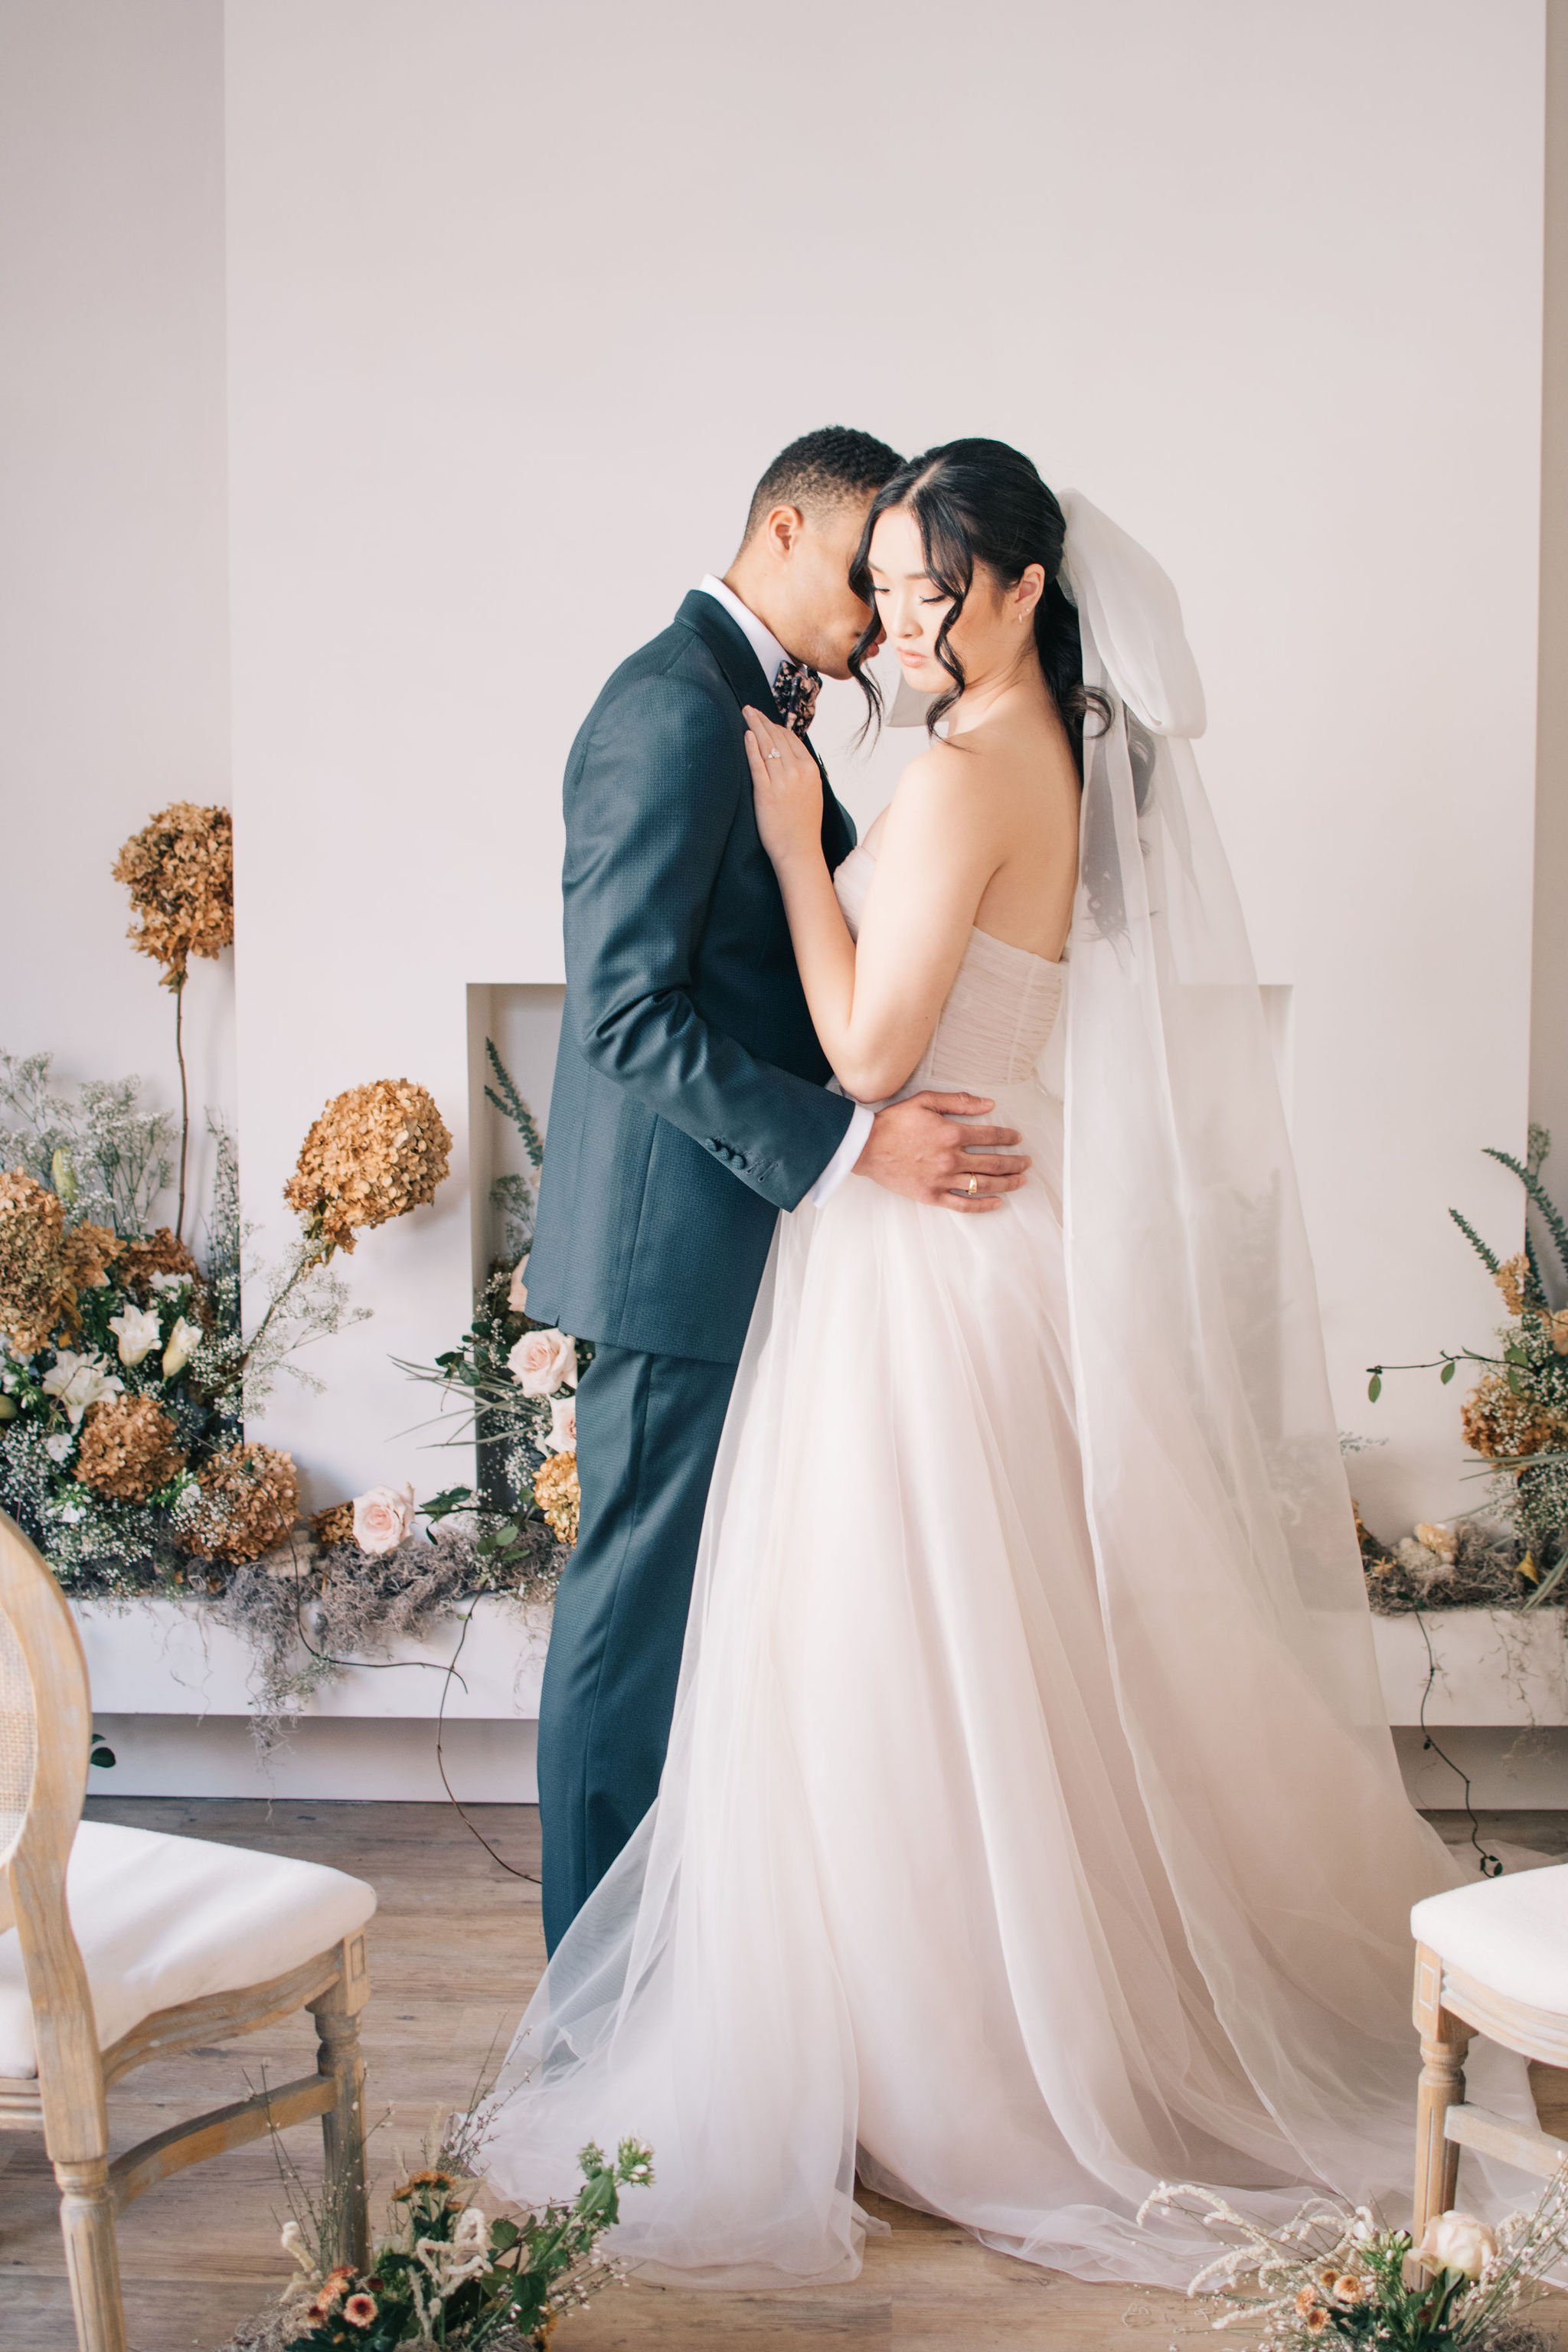 An Elegant and intimate wedding ceremony in Toronto's downtown photographed by Toronto wedding photographers, Ugo Photography